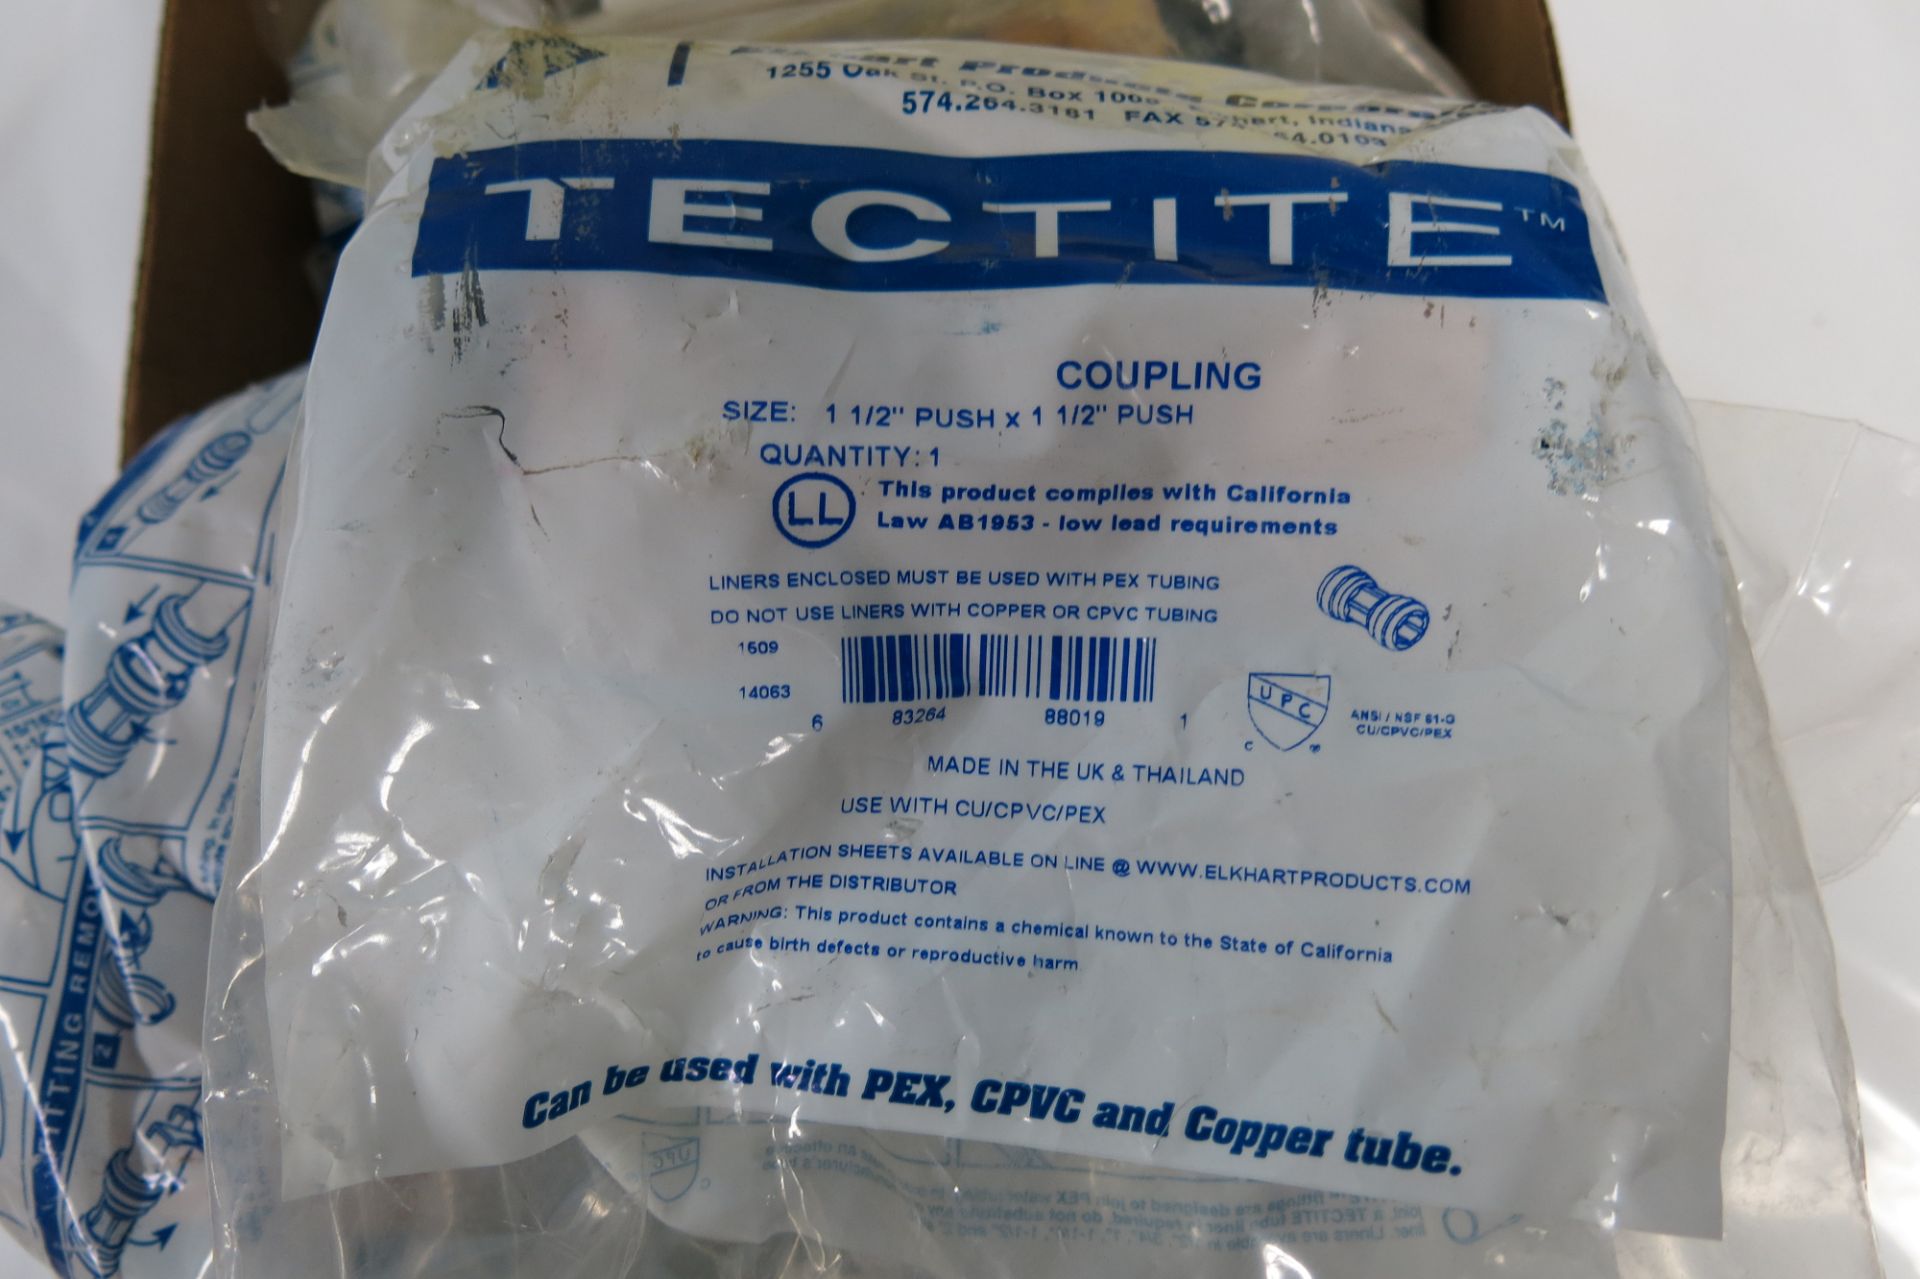 TECTITE, 1 1/2" X 1 1/2" PUSH COUPLINGS - NEW (LOCATED IN MISSISSAUGA) - Image 2 of 3